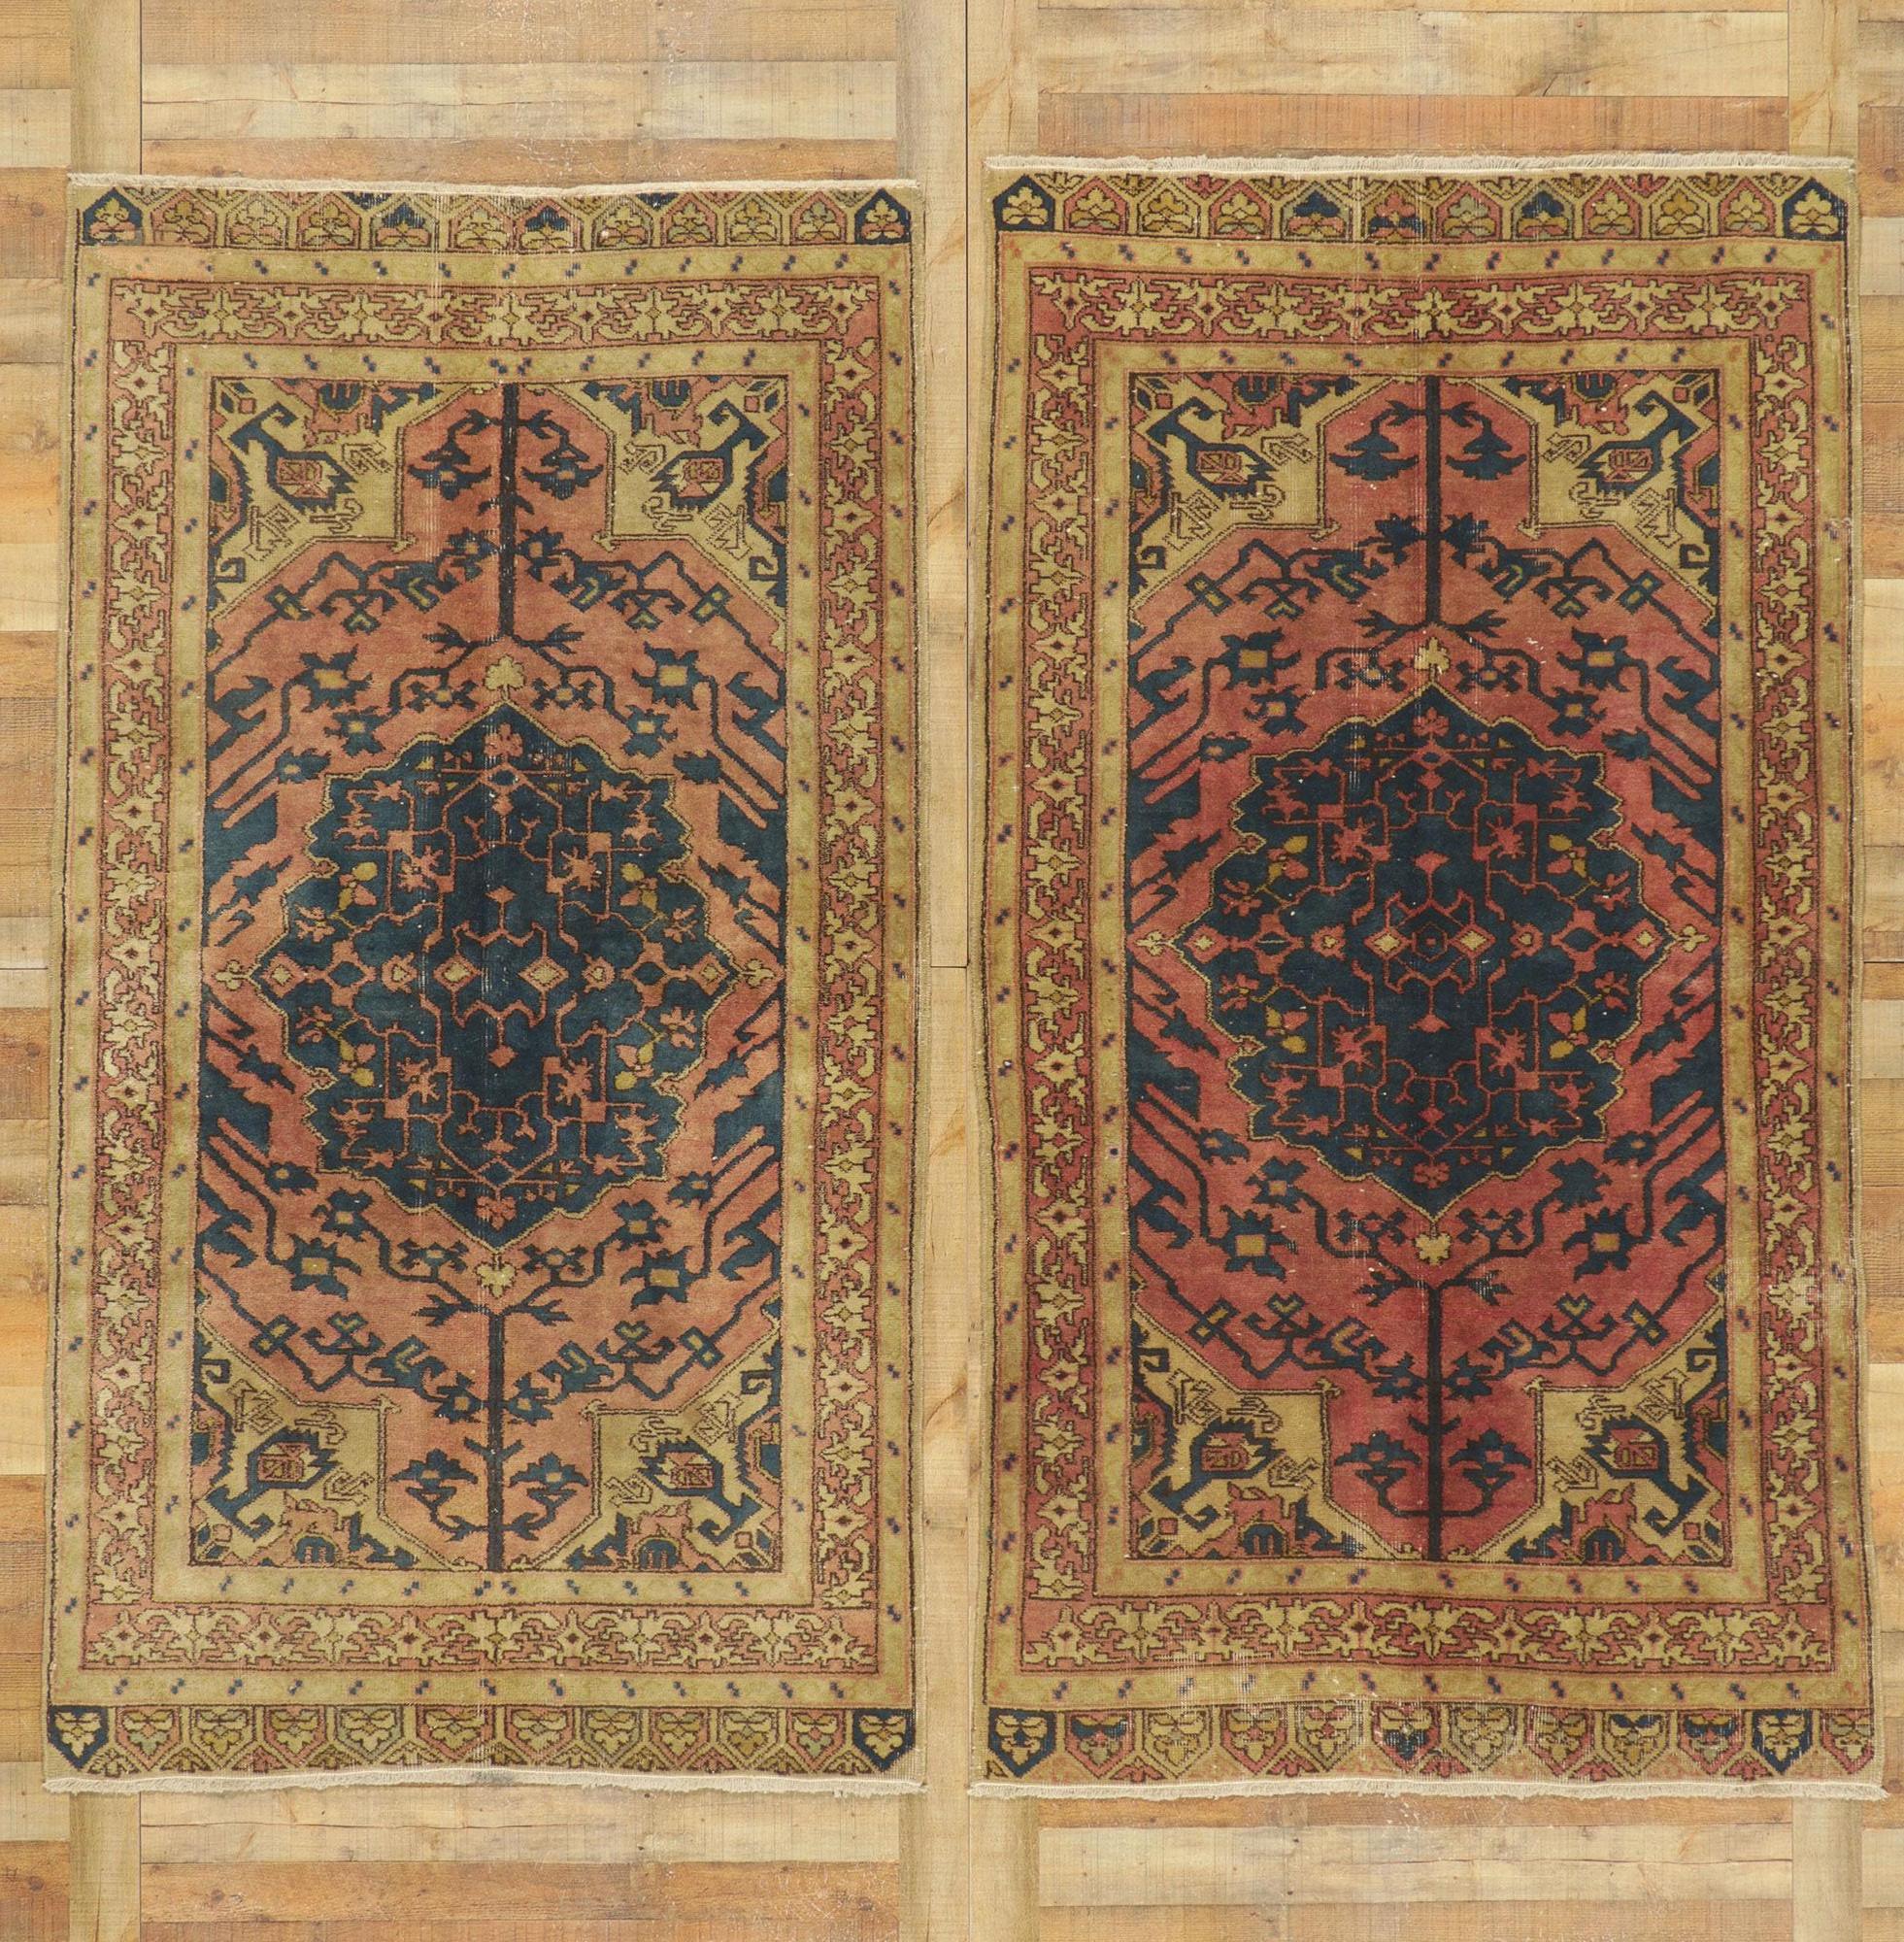 Pair of Matching Vintage Turkish Sivas Rugs with Rustic Earth-Tone Colors For Sale 8